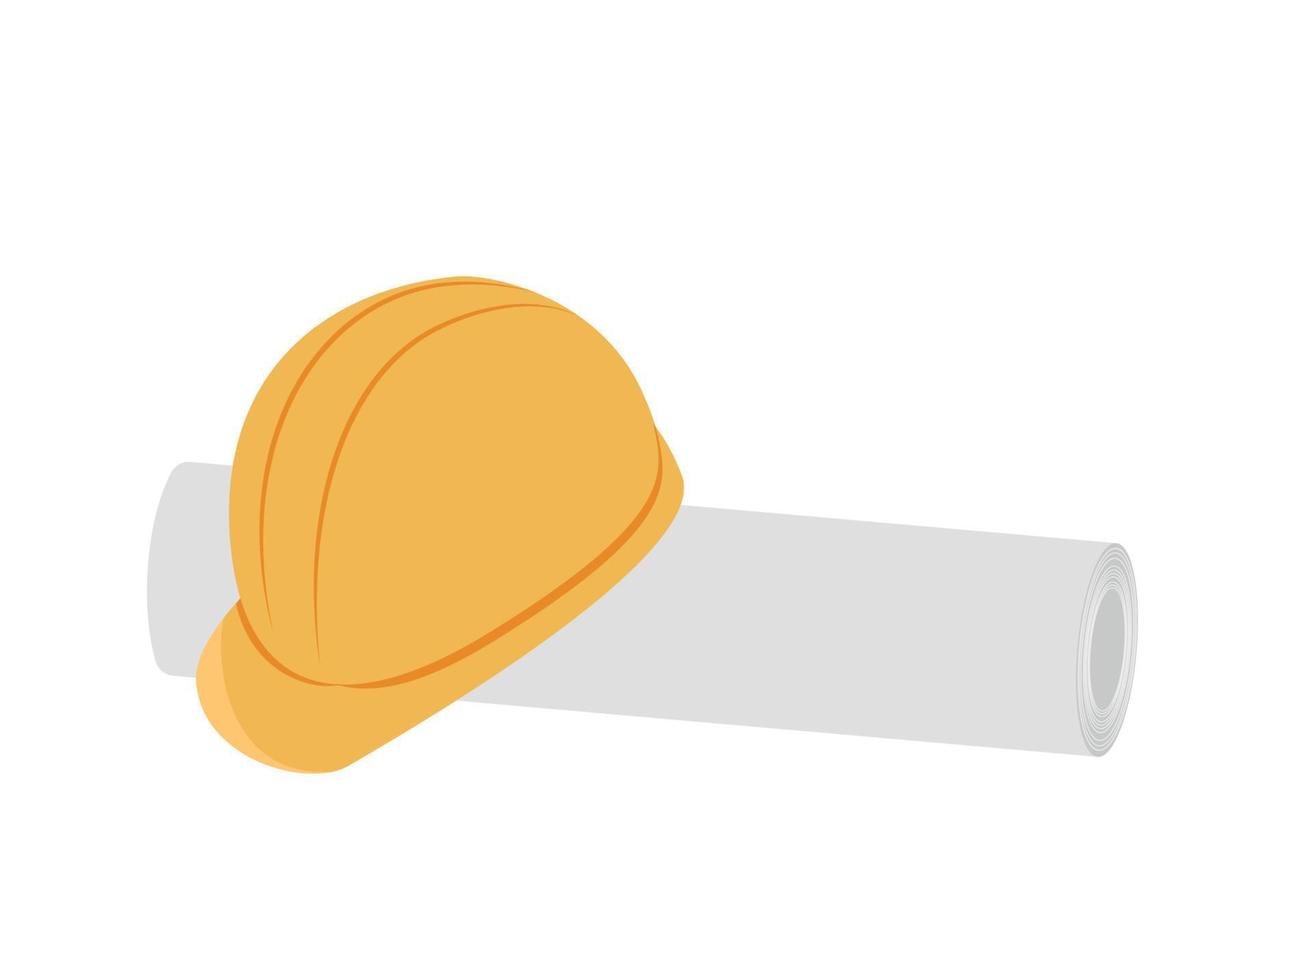 construction helmet with blueprints on white vector